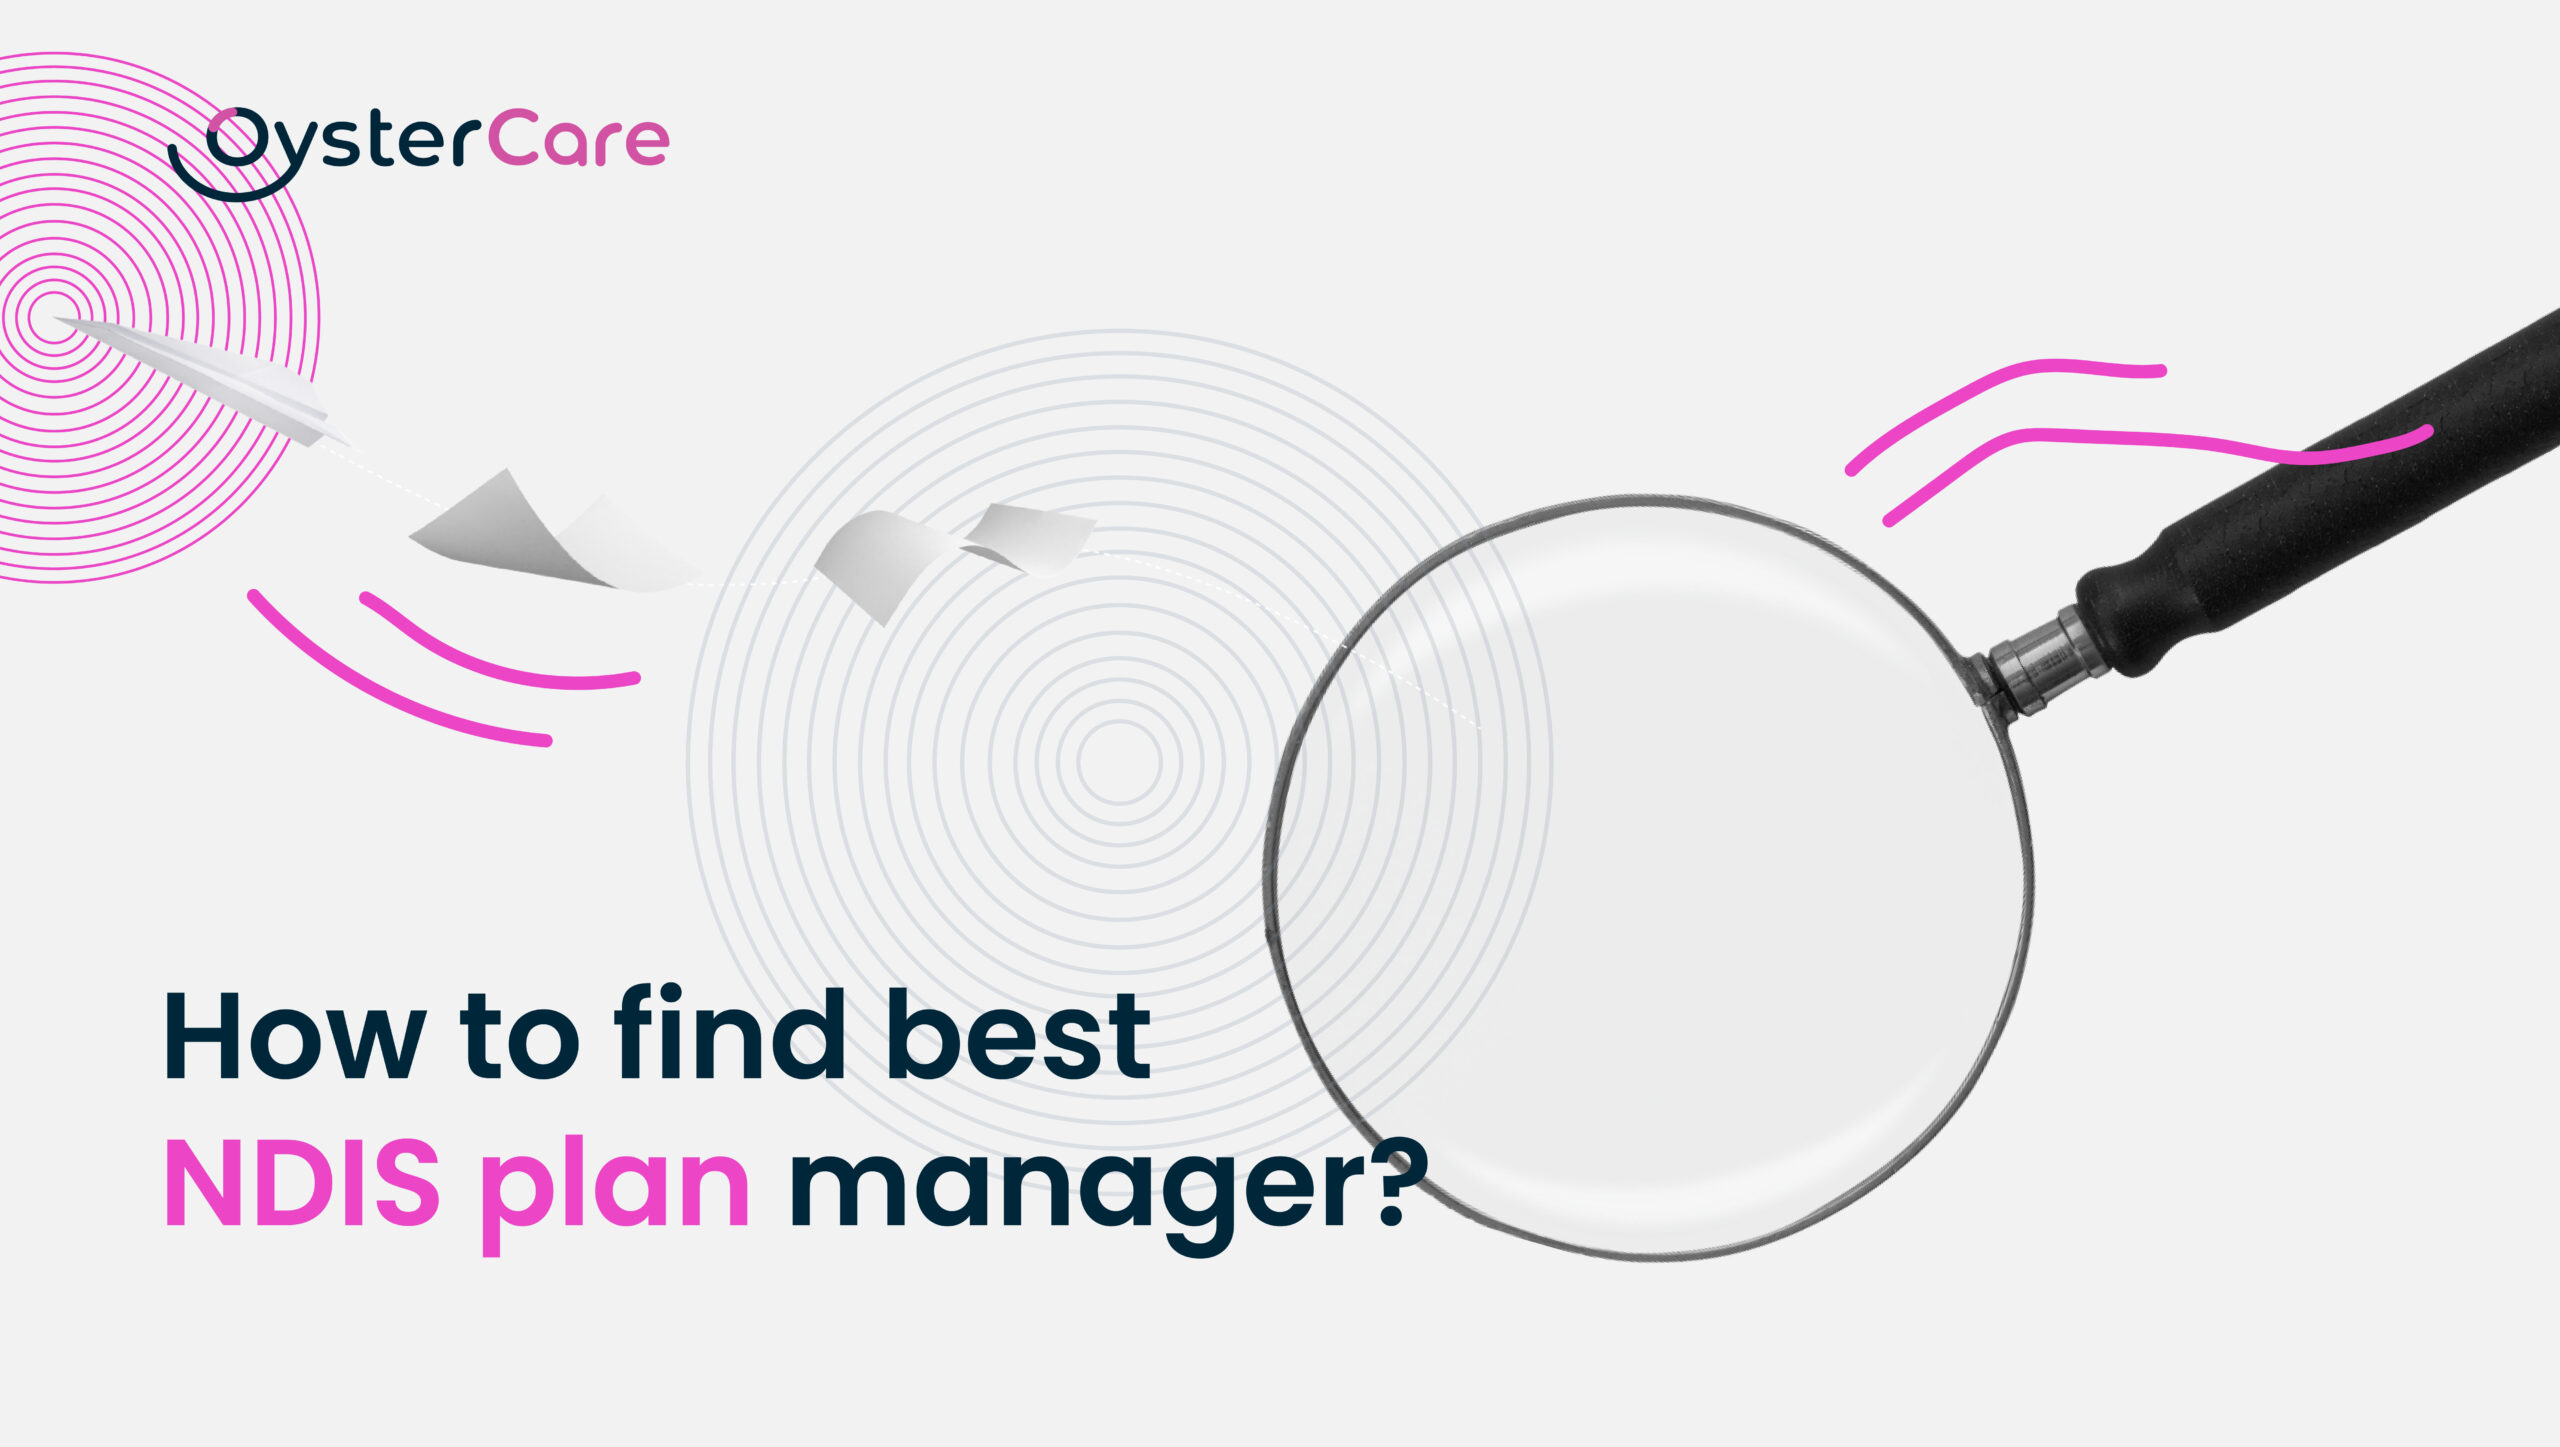 1) How to find best NDIS plan manager-